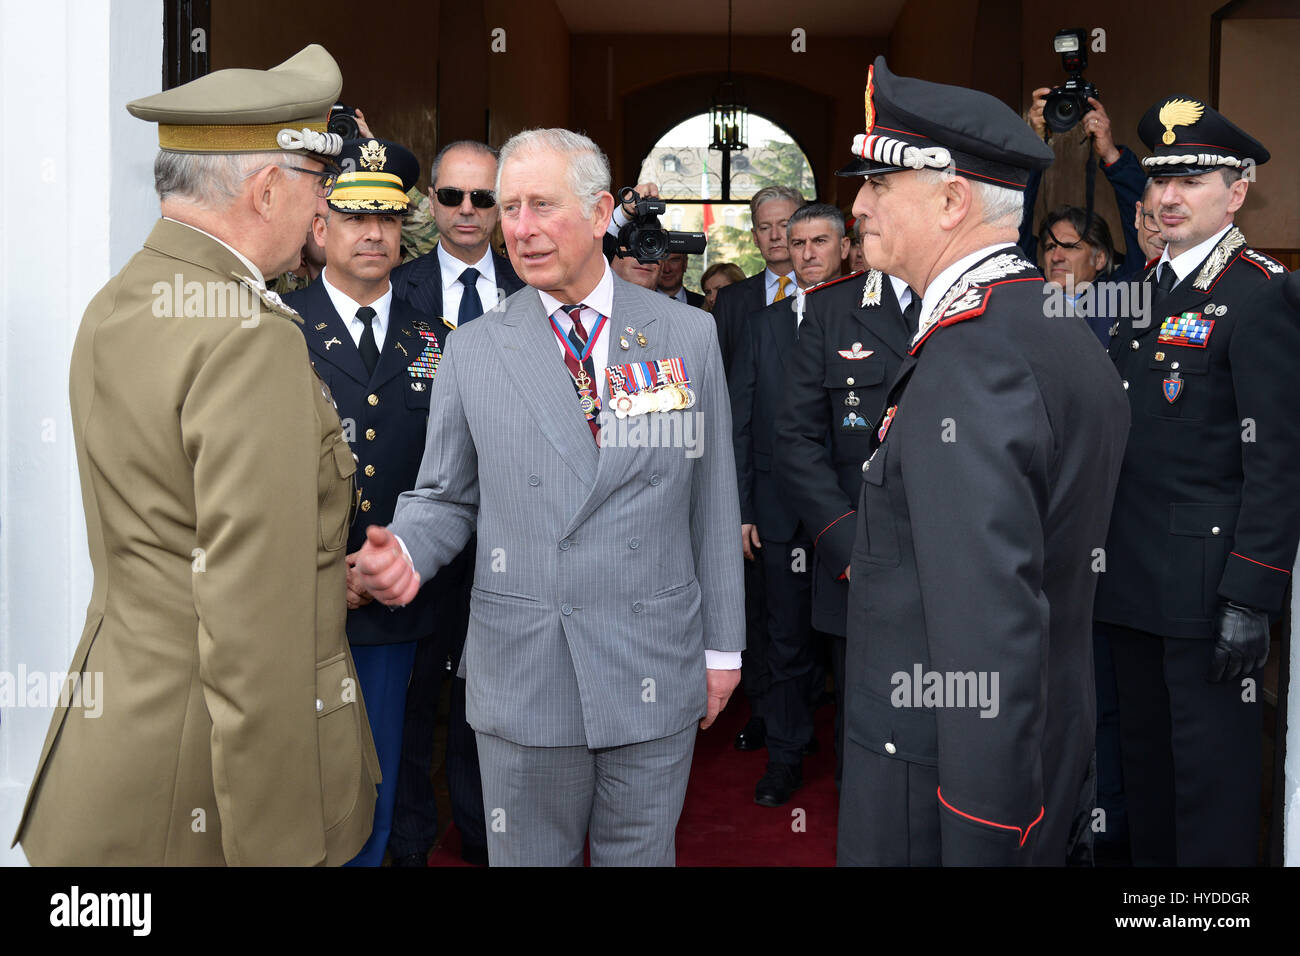 Charles, Prince of Wales meets Gen. Claudio Graziano, Italian Army Chief of Staff, left, during a visit to the Center of Excellence for Stability Police Units April 1, 2017 in Vicenza, Italy. The center is a train the trainer school developed by the Carabinieri for peace-keeping missions around the world. Stock Photo